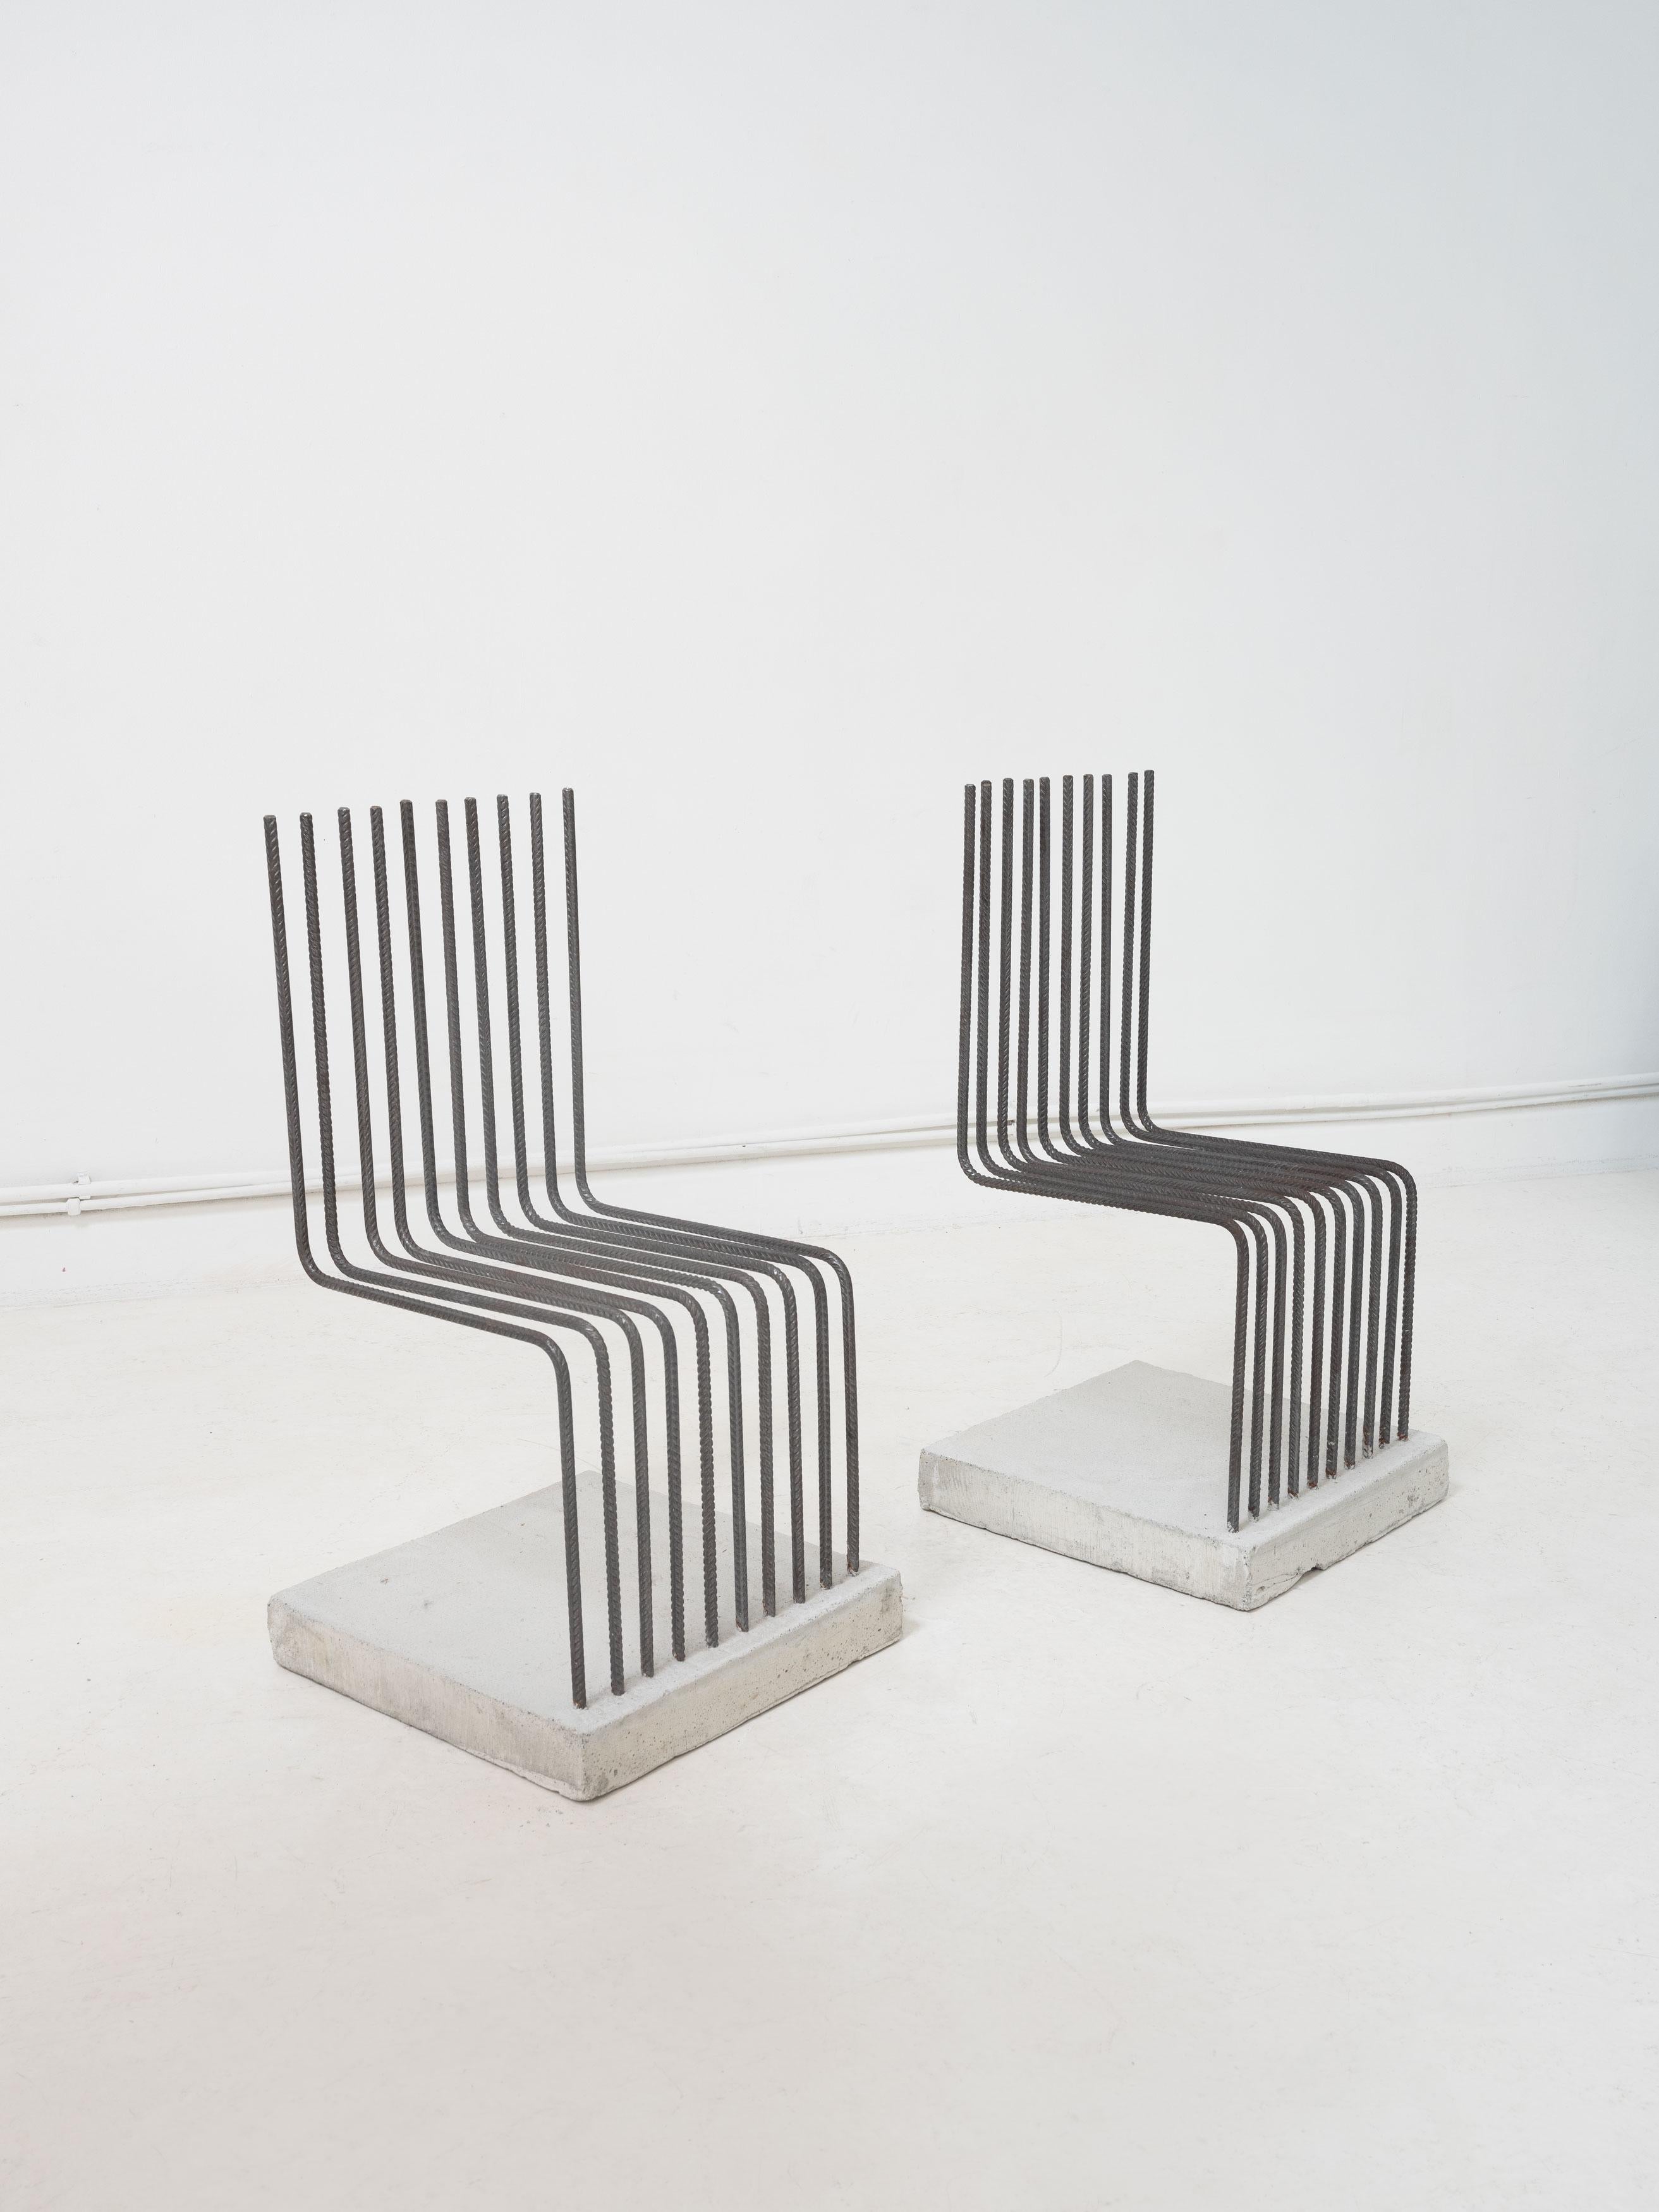 Postmodern 'Solid chairs' designed by Heinz Landes in 1986 as part of the Neues Deutsches Design movement. Composed from bent rebar set in to concrete bases. The chairs are industrial, rebellious and playful, standing apart whist also conforming to